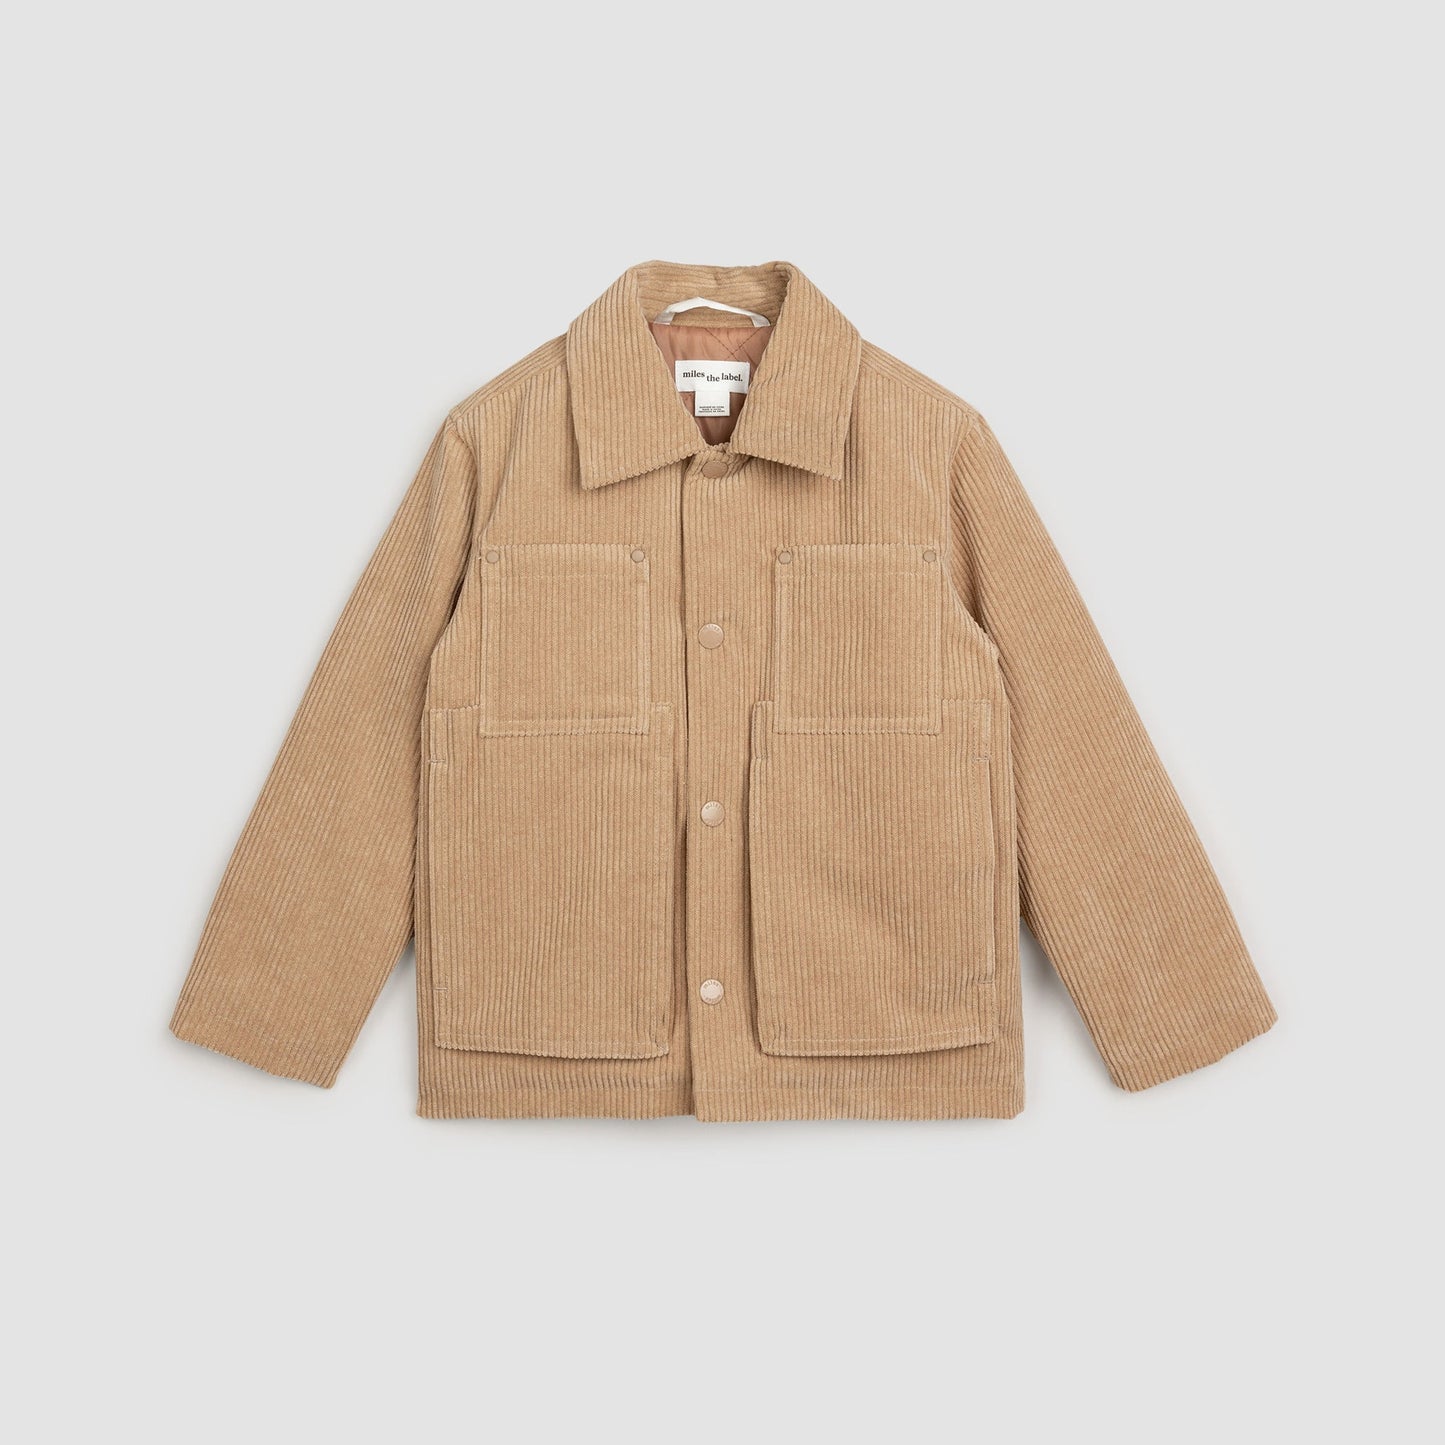 Boy Lined Jacket/Miles the Label